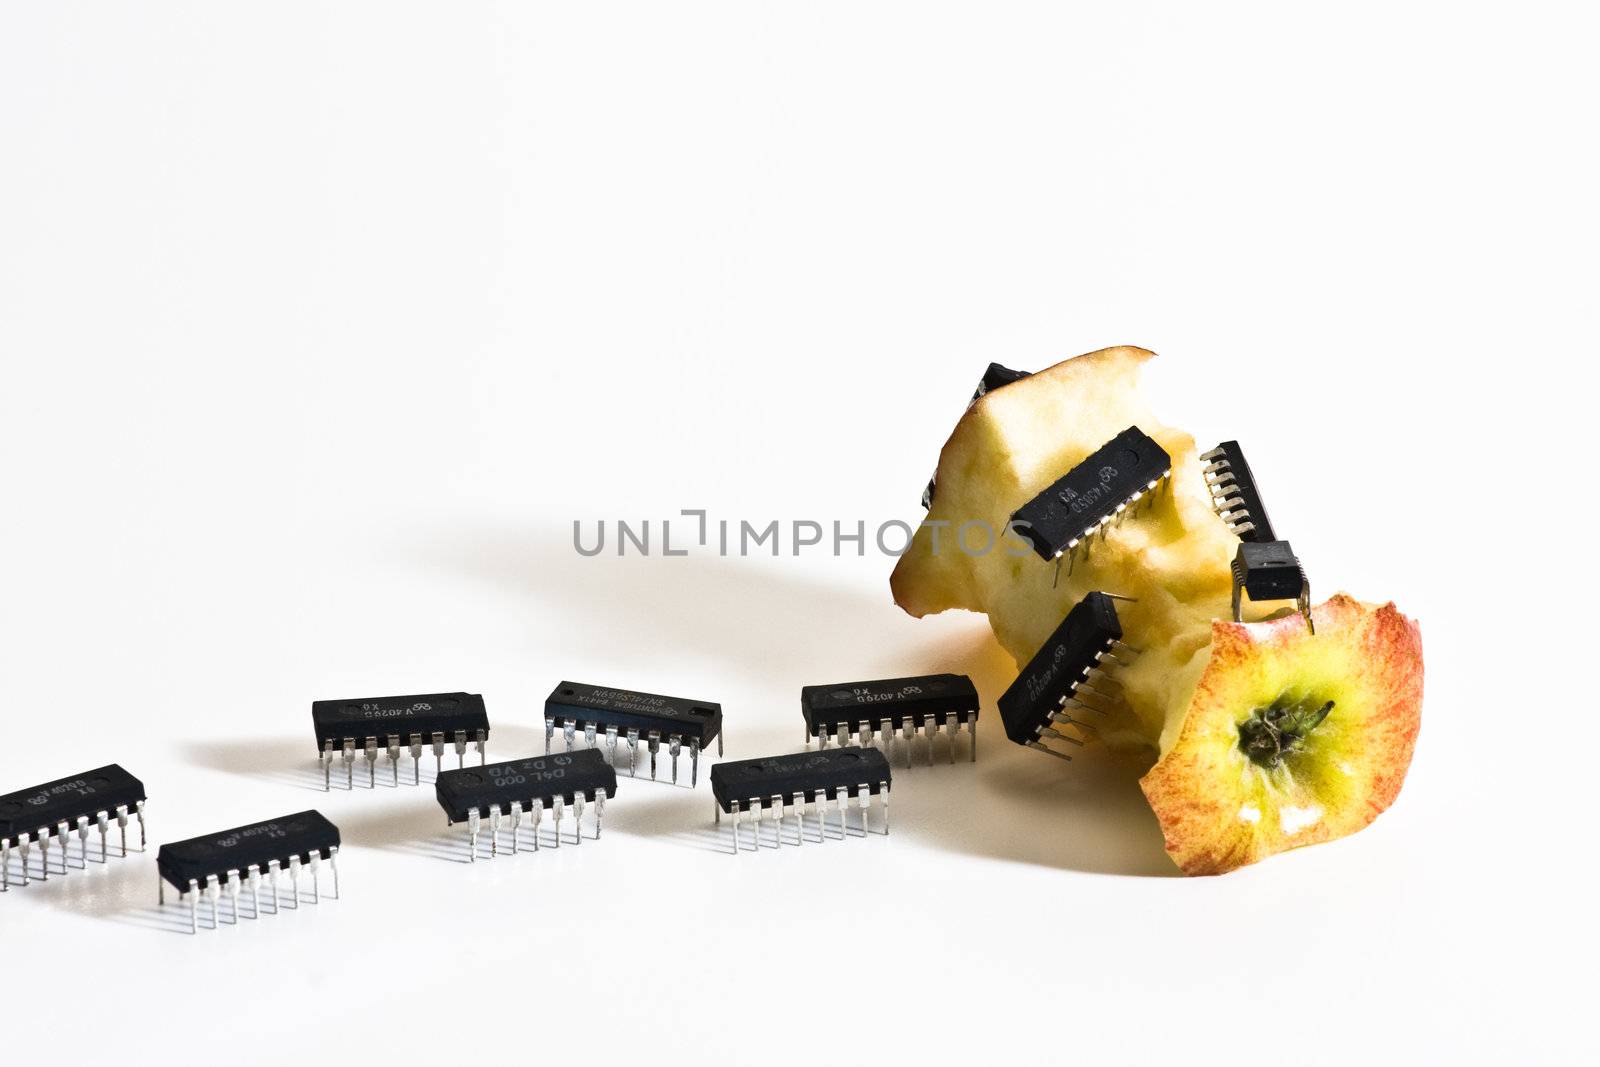 Processor chips eating an apple by Jsthr